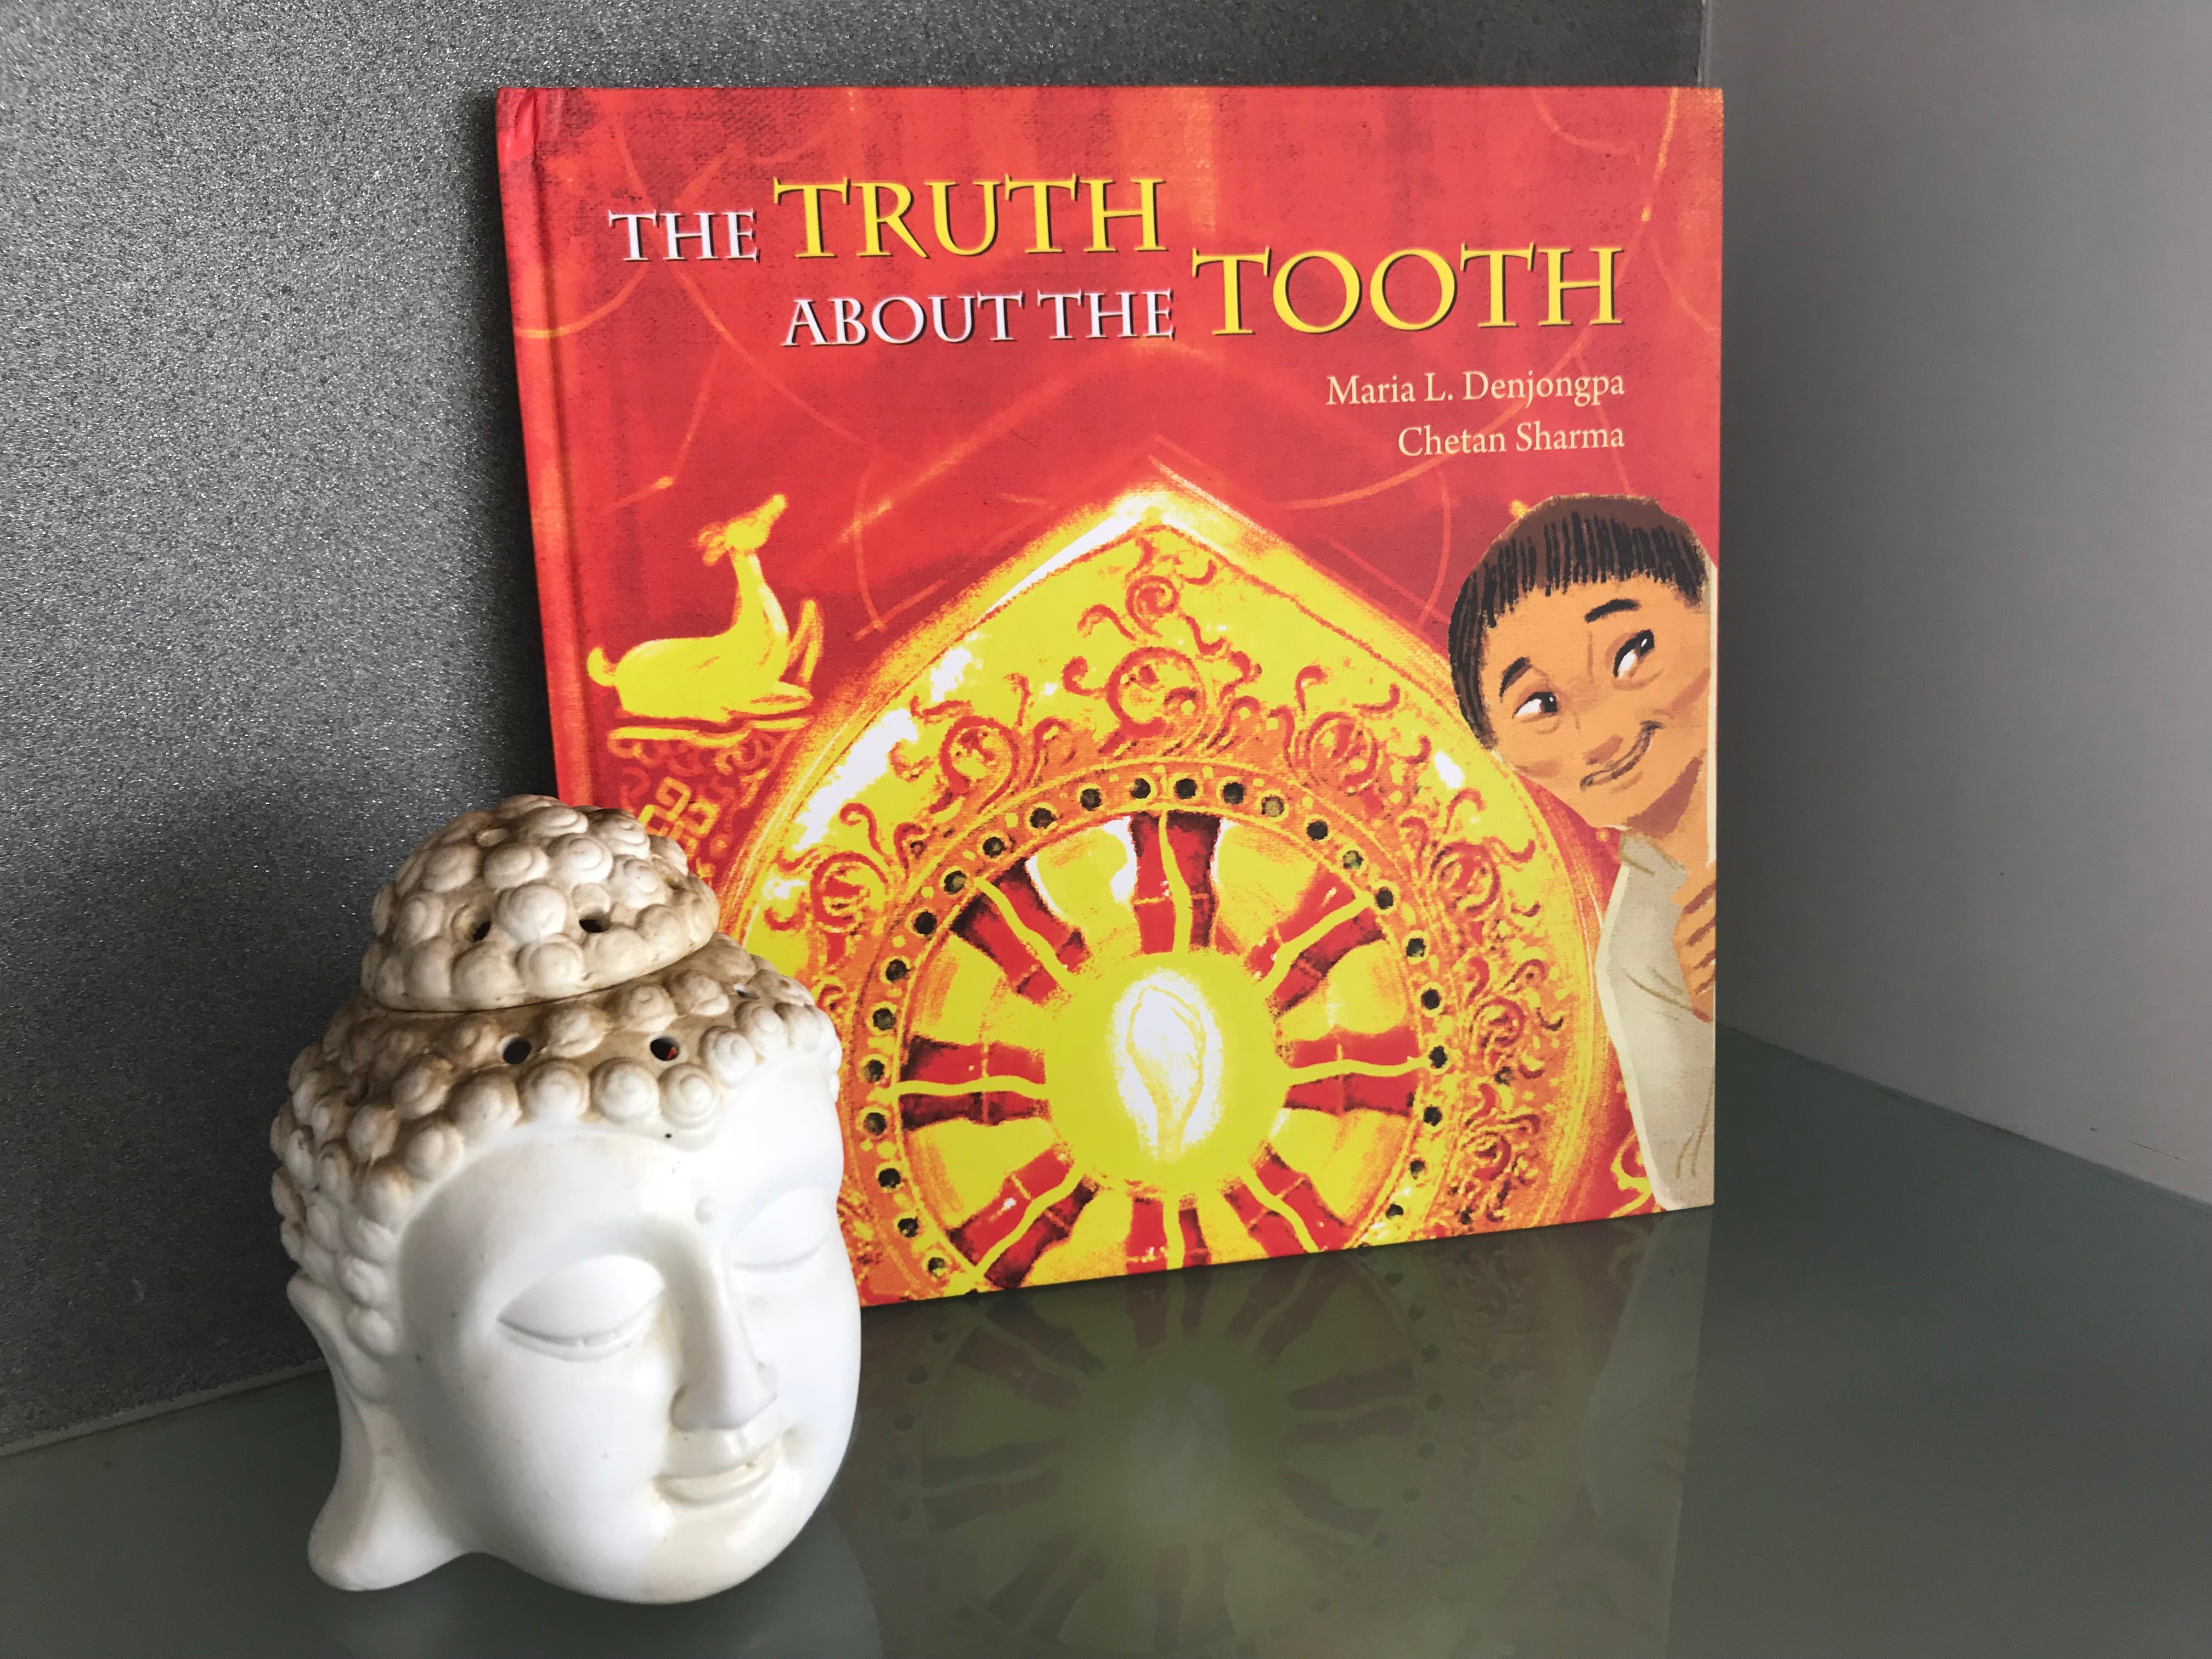 You are currently viewing The Truth about the Tooth by Maria L. Denjongpa explores the power of faith